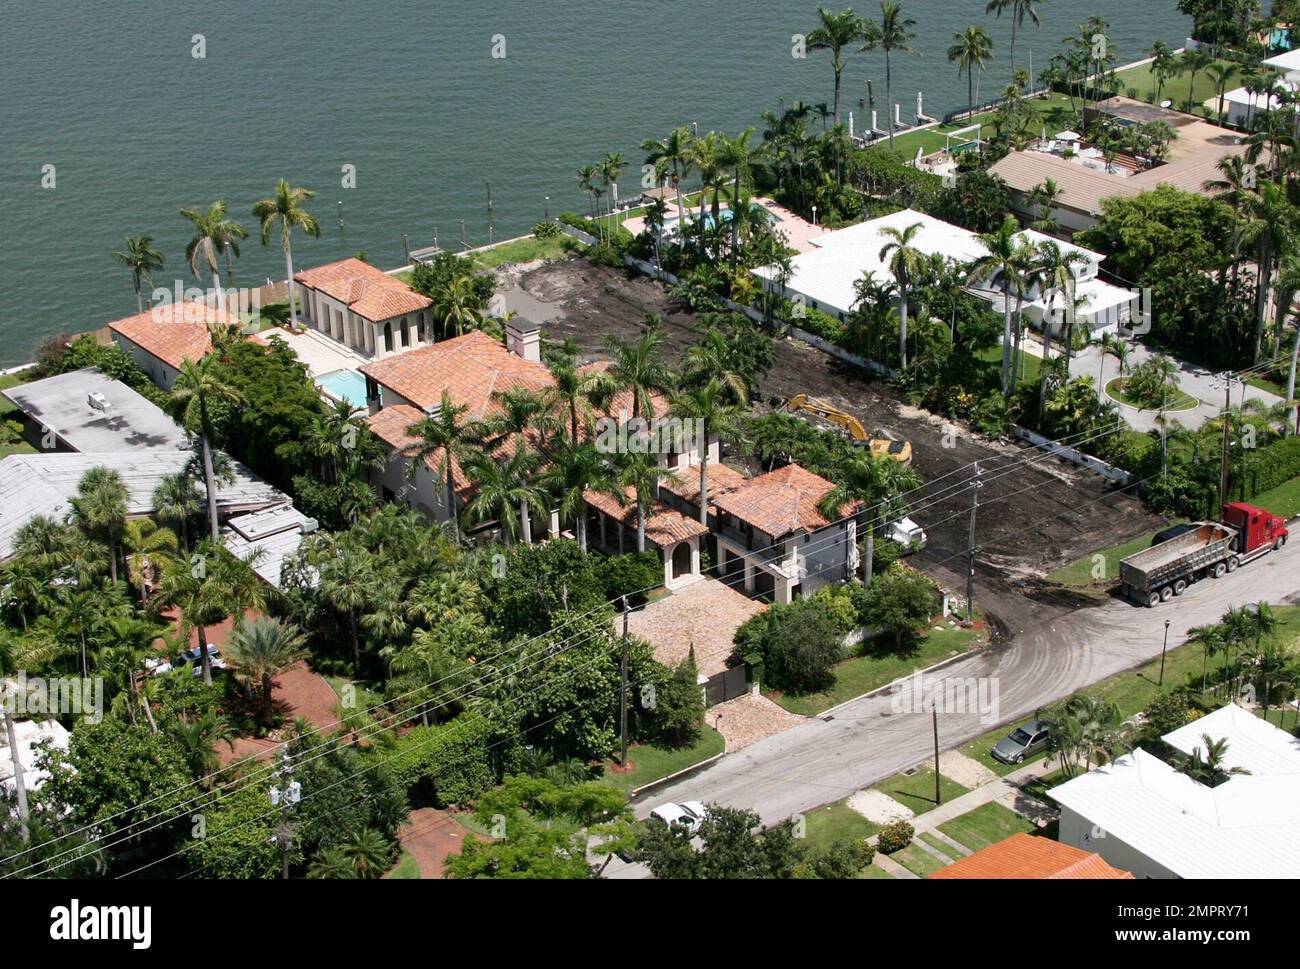 Exclusive!! Matt Damon has added to the grounds of his $10.3m Miami waterfront mansion in the only way possible: buying the property next door and levelling it! The Oceans 13 superstar purchased the adjacent property for $4.2m and rumour has it that he plans only to build tennis courts and a pool. 9/1/06 Stock Photo